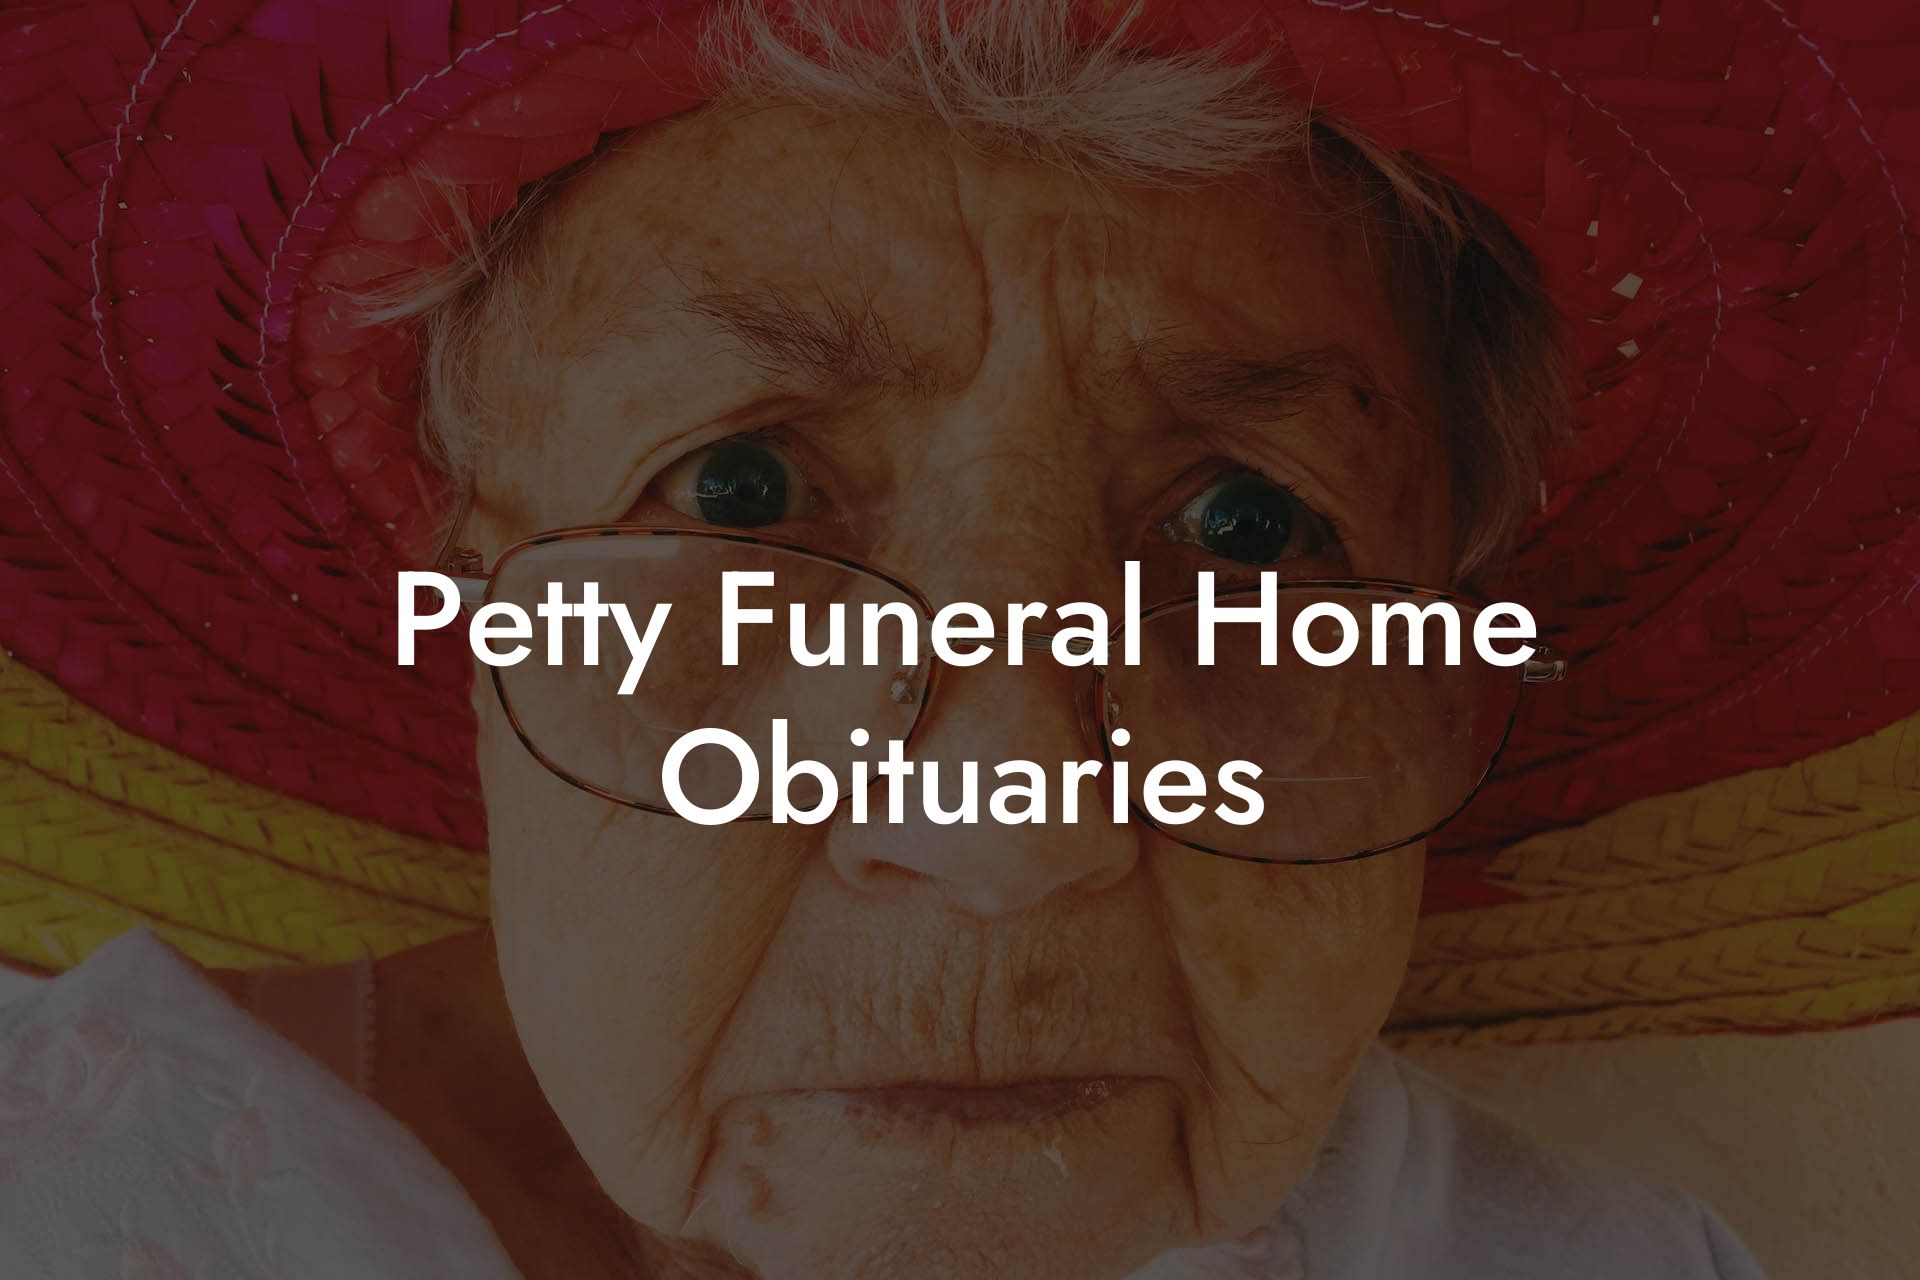 Petty Funeral Home Obituaries